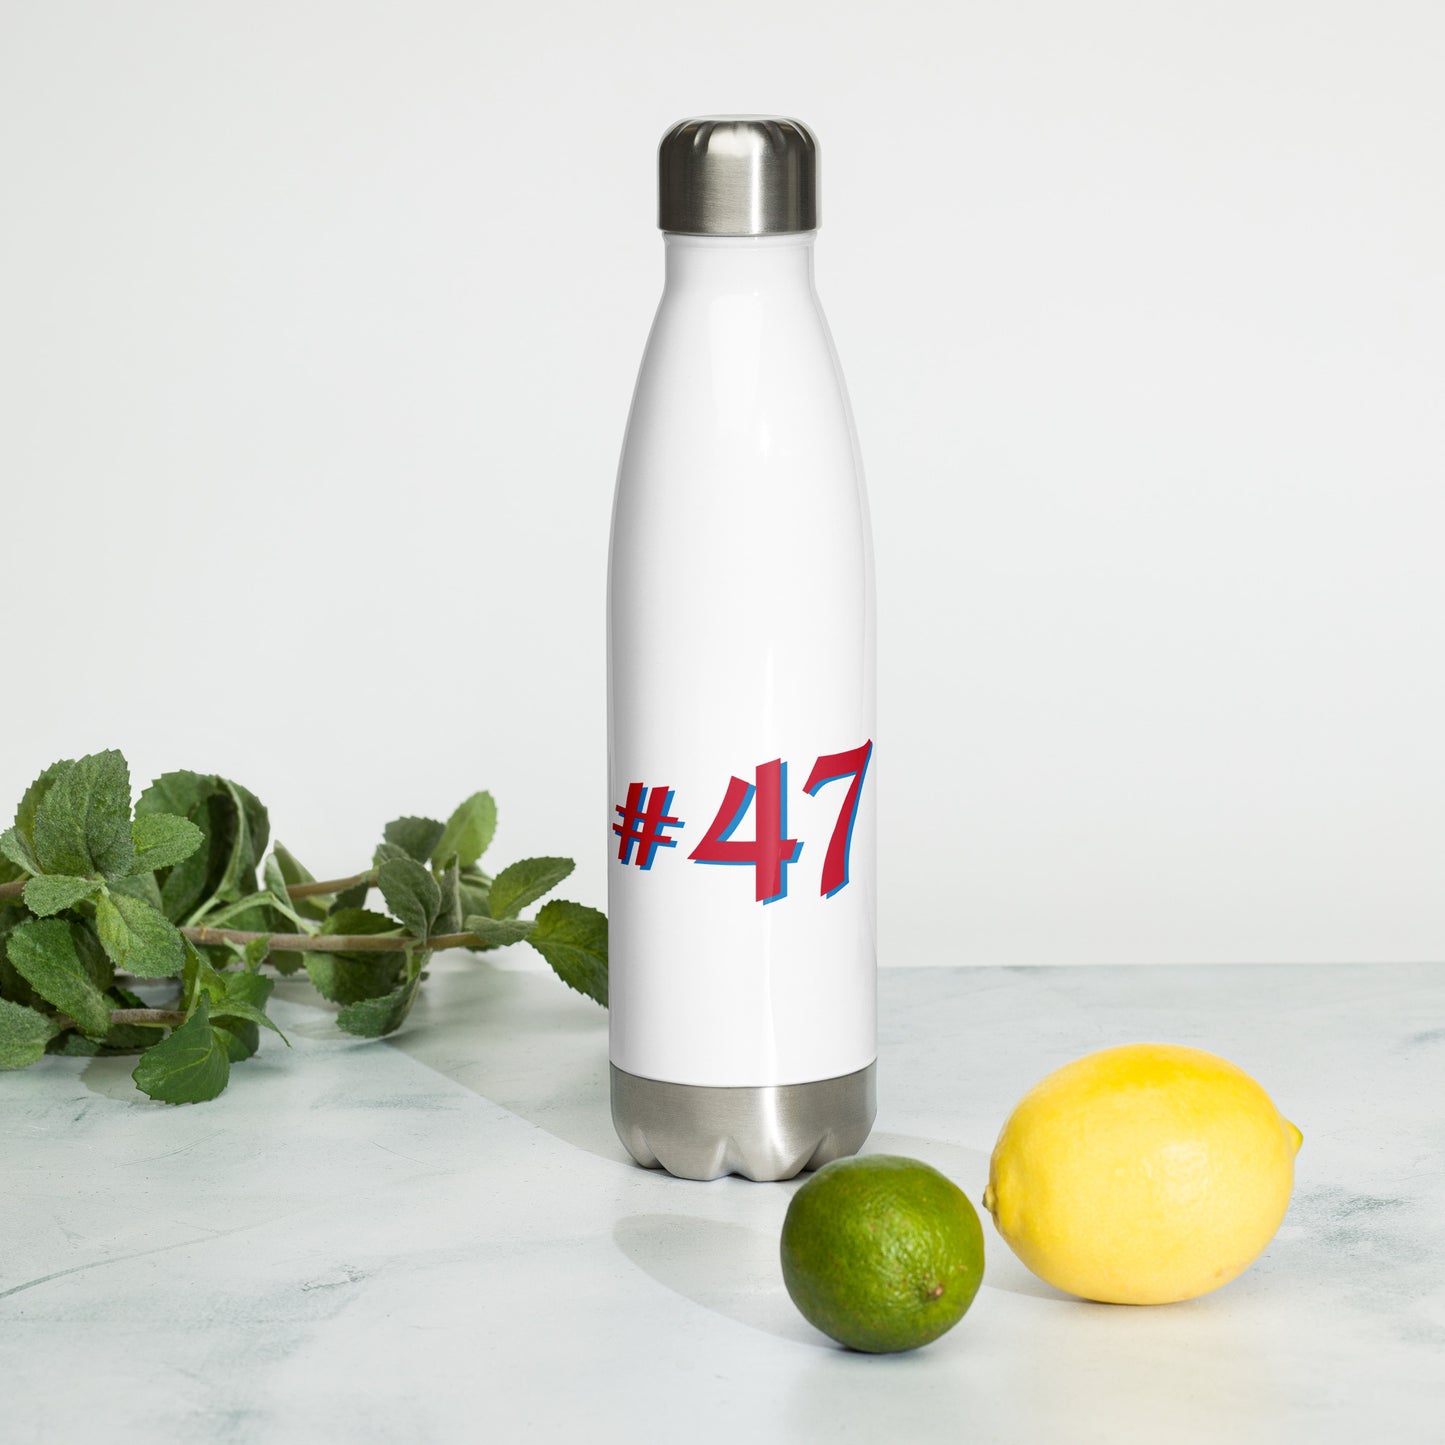 #47 "Style A" Stainless steel water bottle